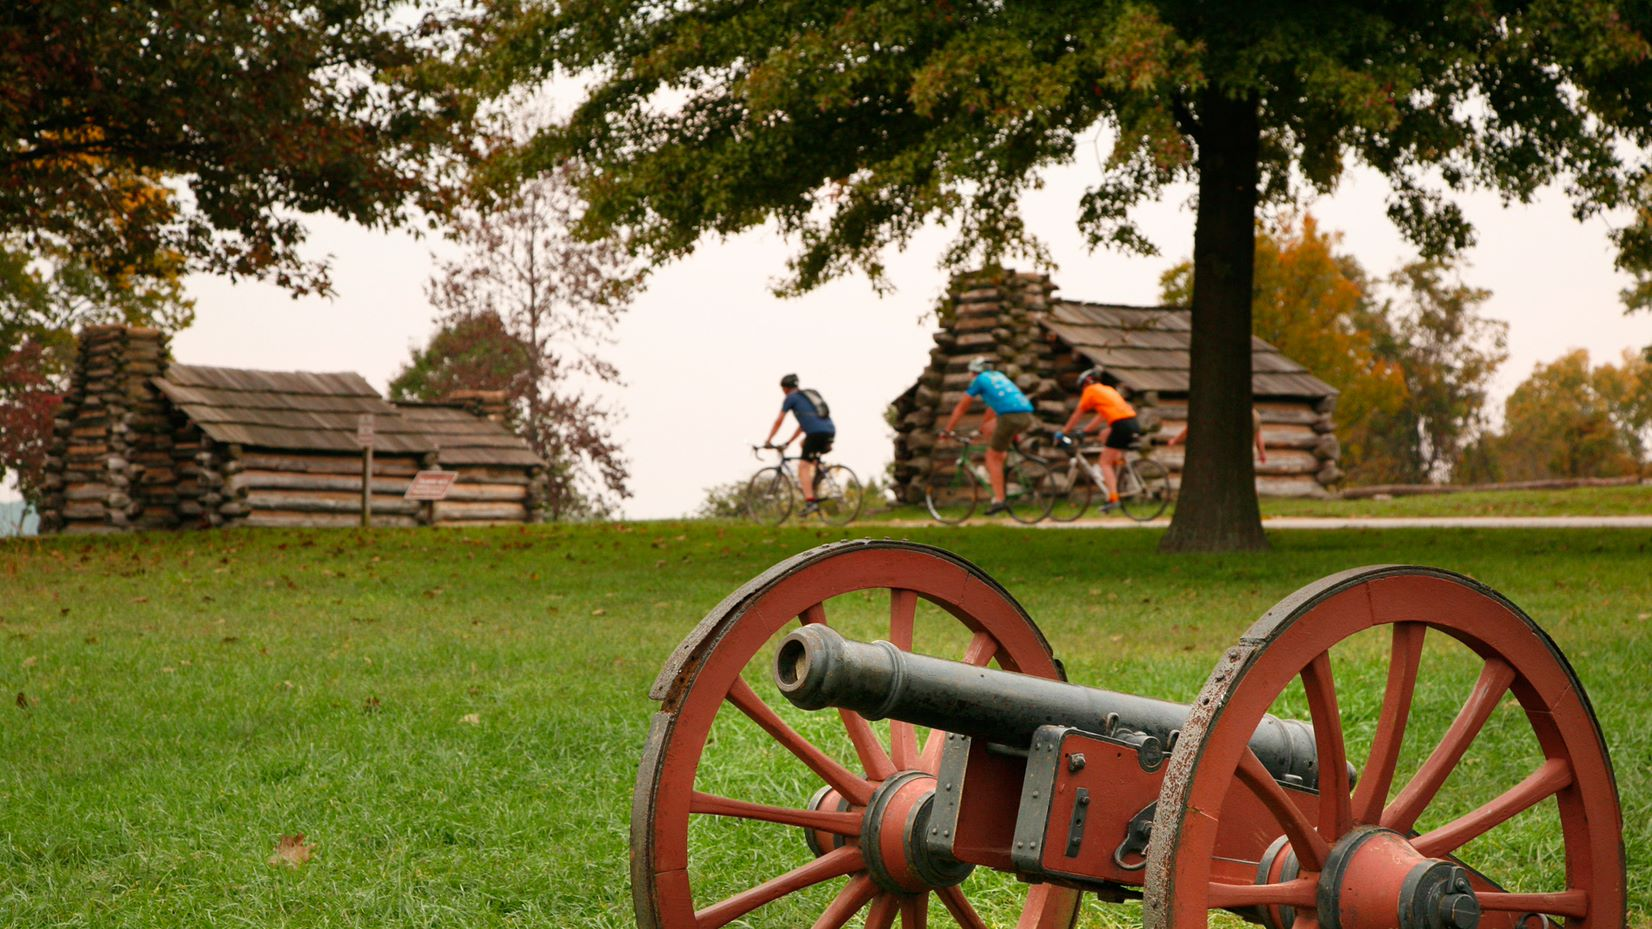 Photo of Valley Forge National Historic Park with people bicycling next to historic homes and a cannon